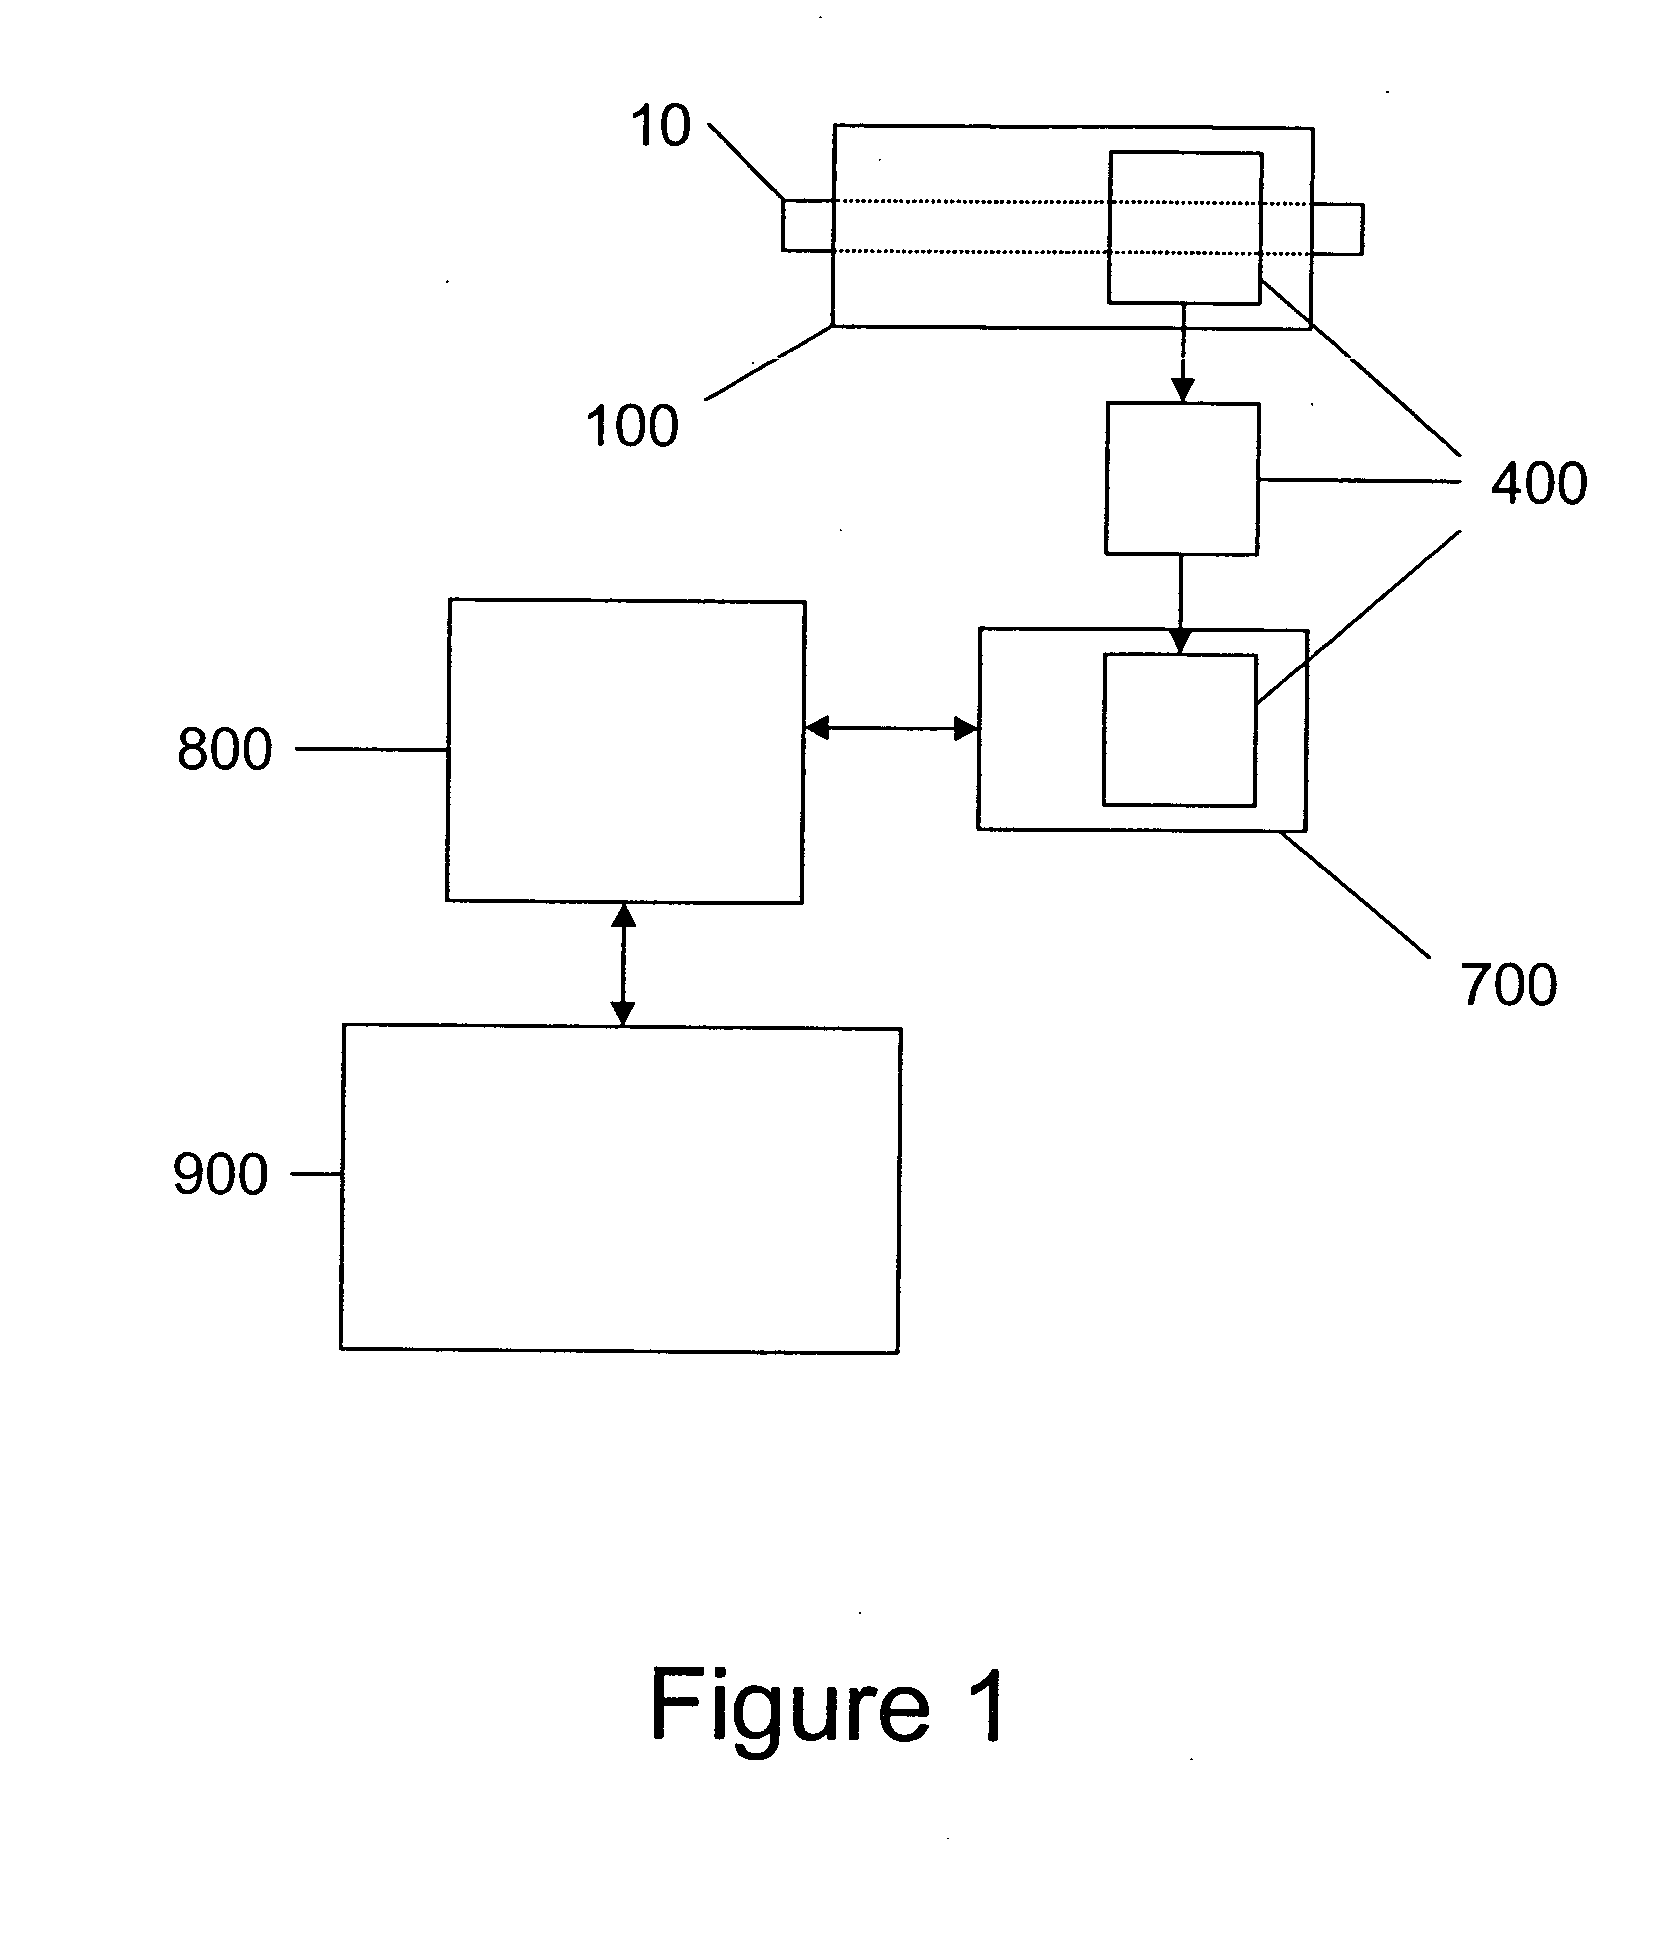 Umbilical cord sampling system and method